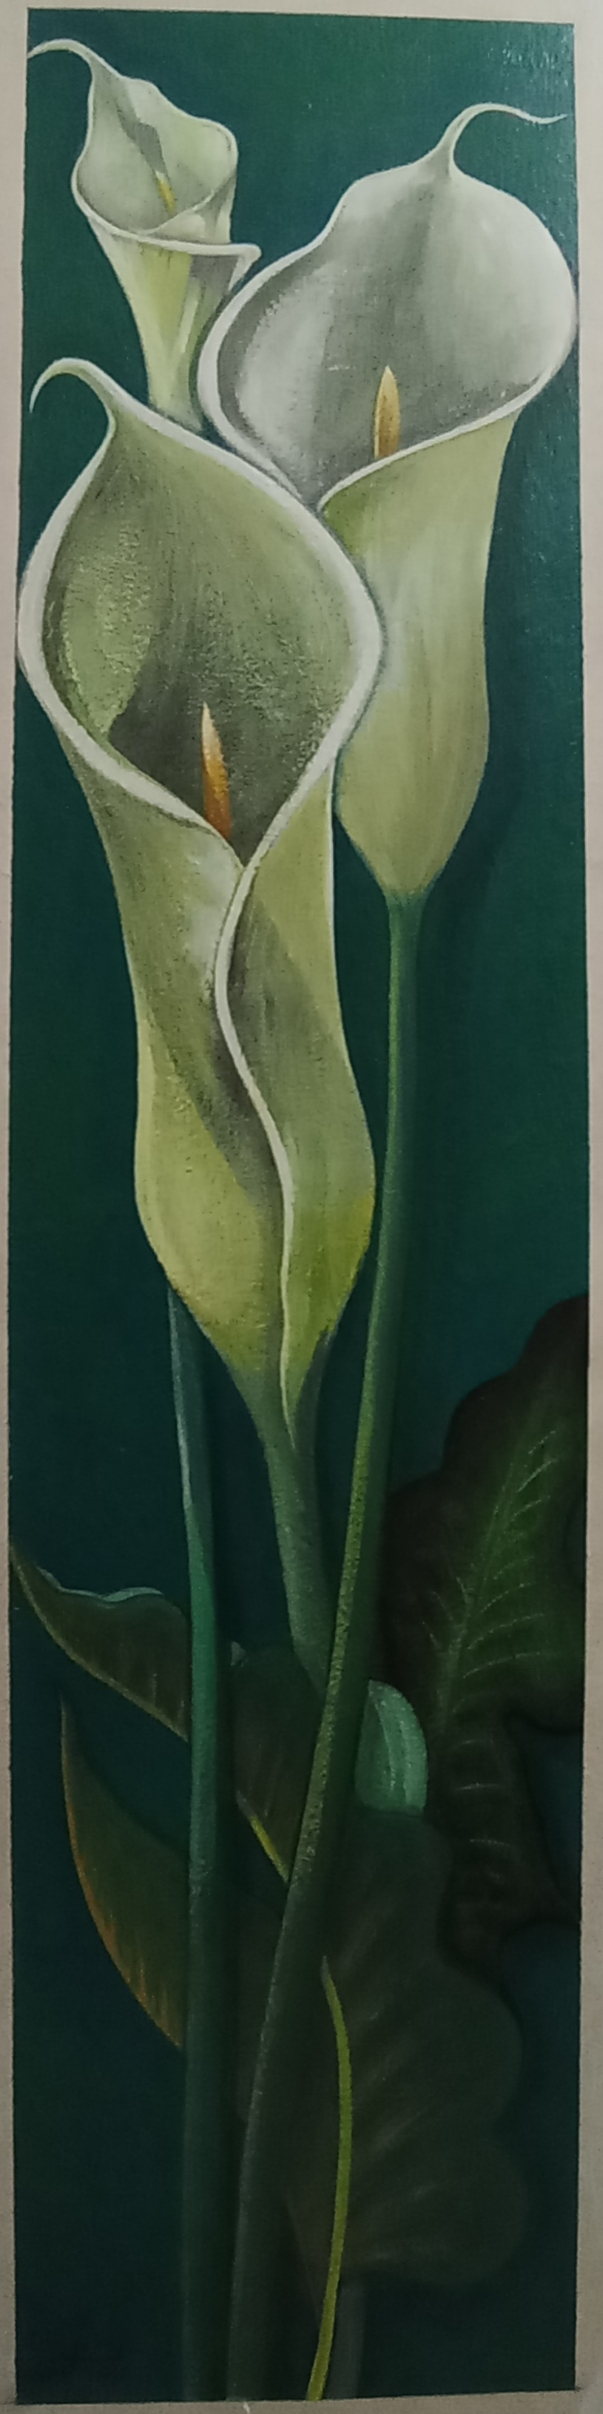 Painting by Khaled Hamdy .H - Three Calla flowers